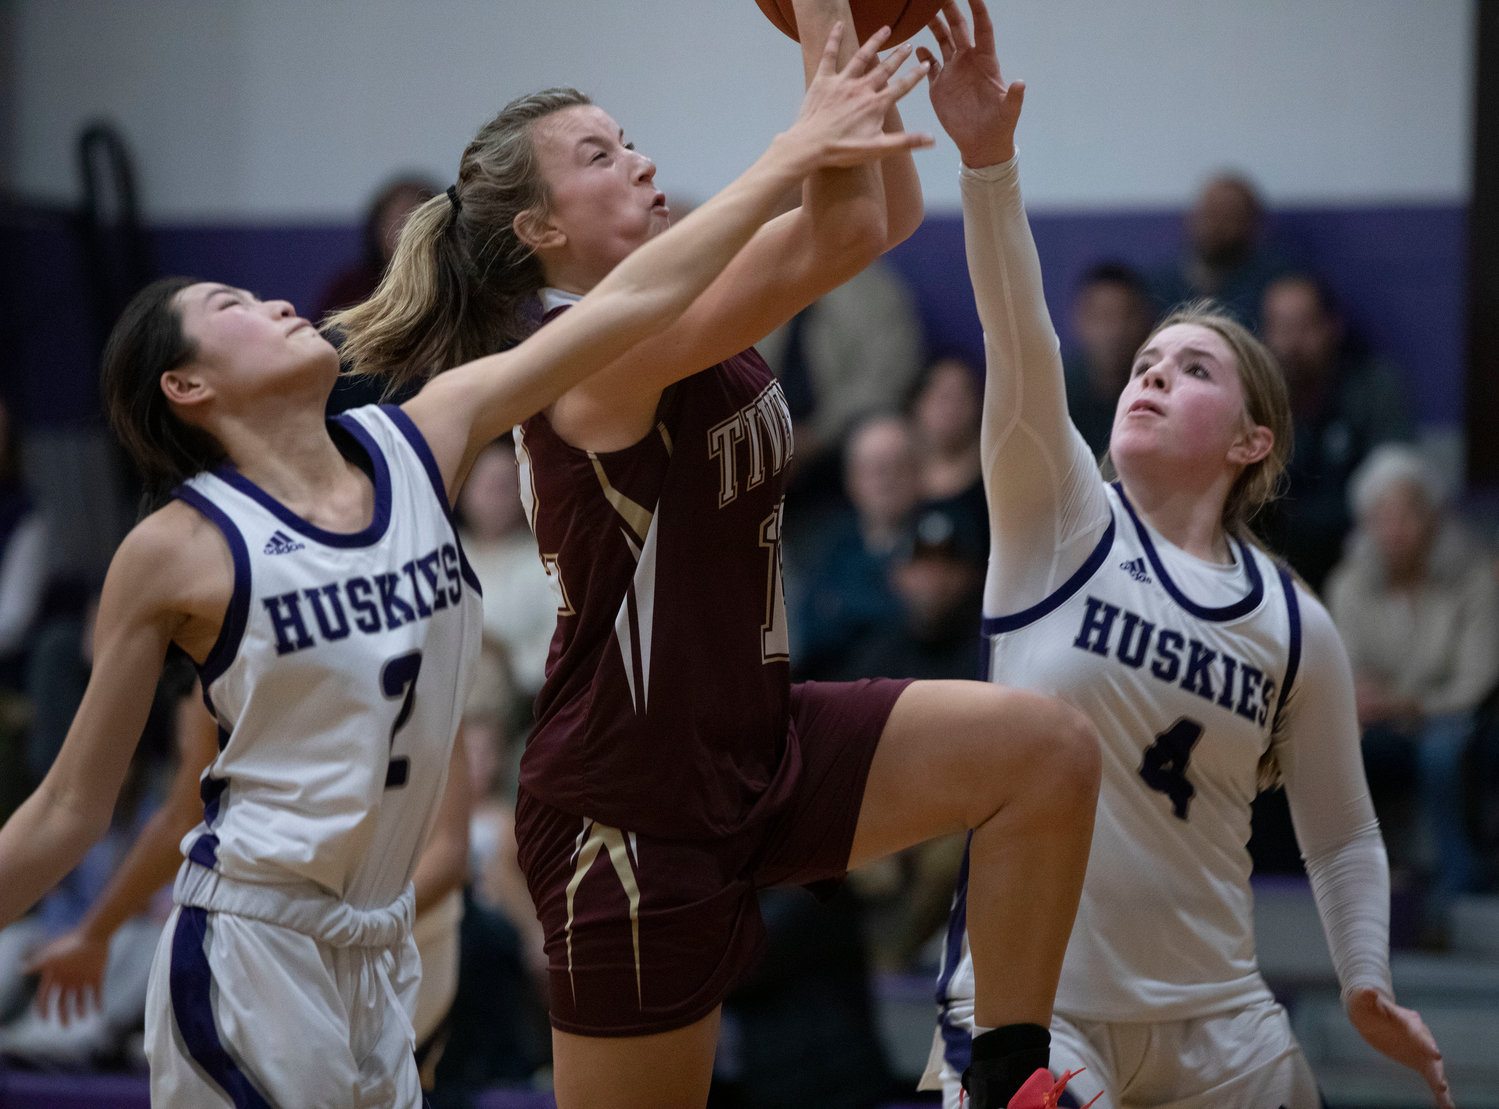 Katie Richardson drives for a layup between Huskies guards Elsa White (left) and Lilly DaSilveira.